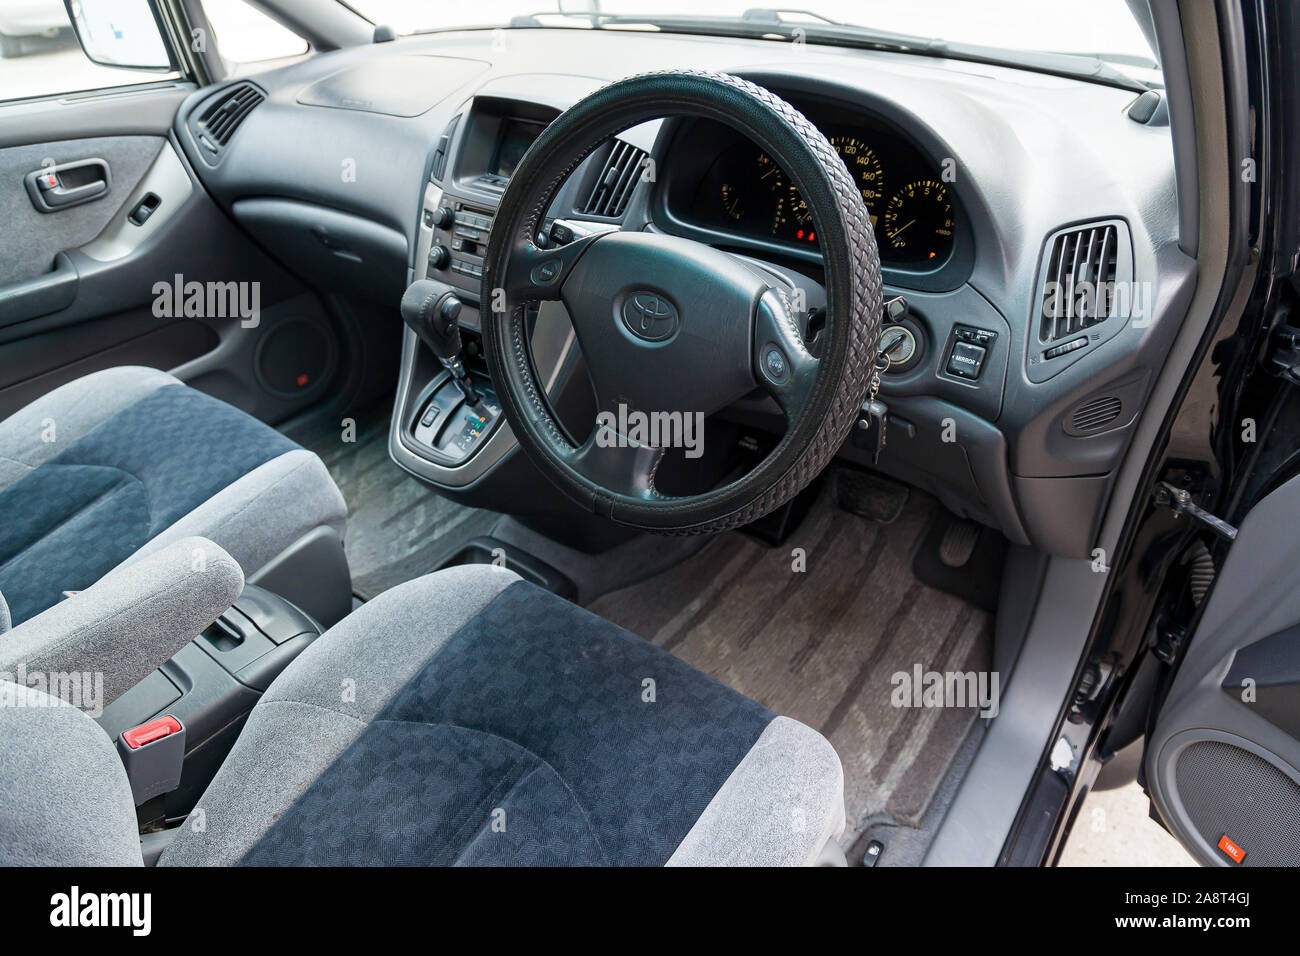 Novosibirsk, Russia - 11.05.2019: View to the gray interior of Toyota Harrier or Lexus RX300 with dashboard, clock, media system, front seats and shif Stock Photo